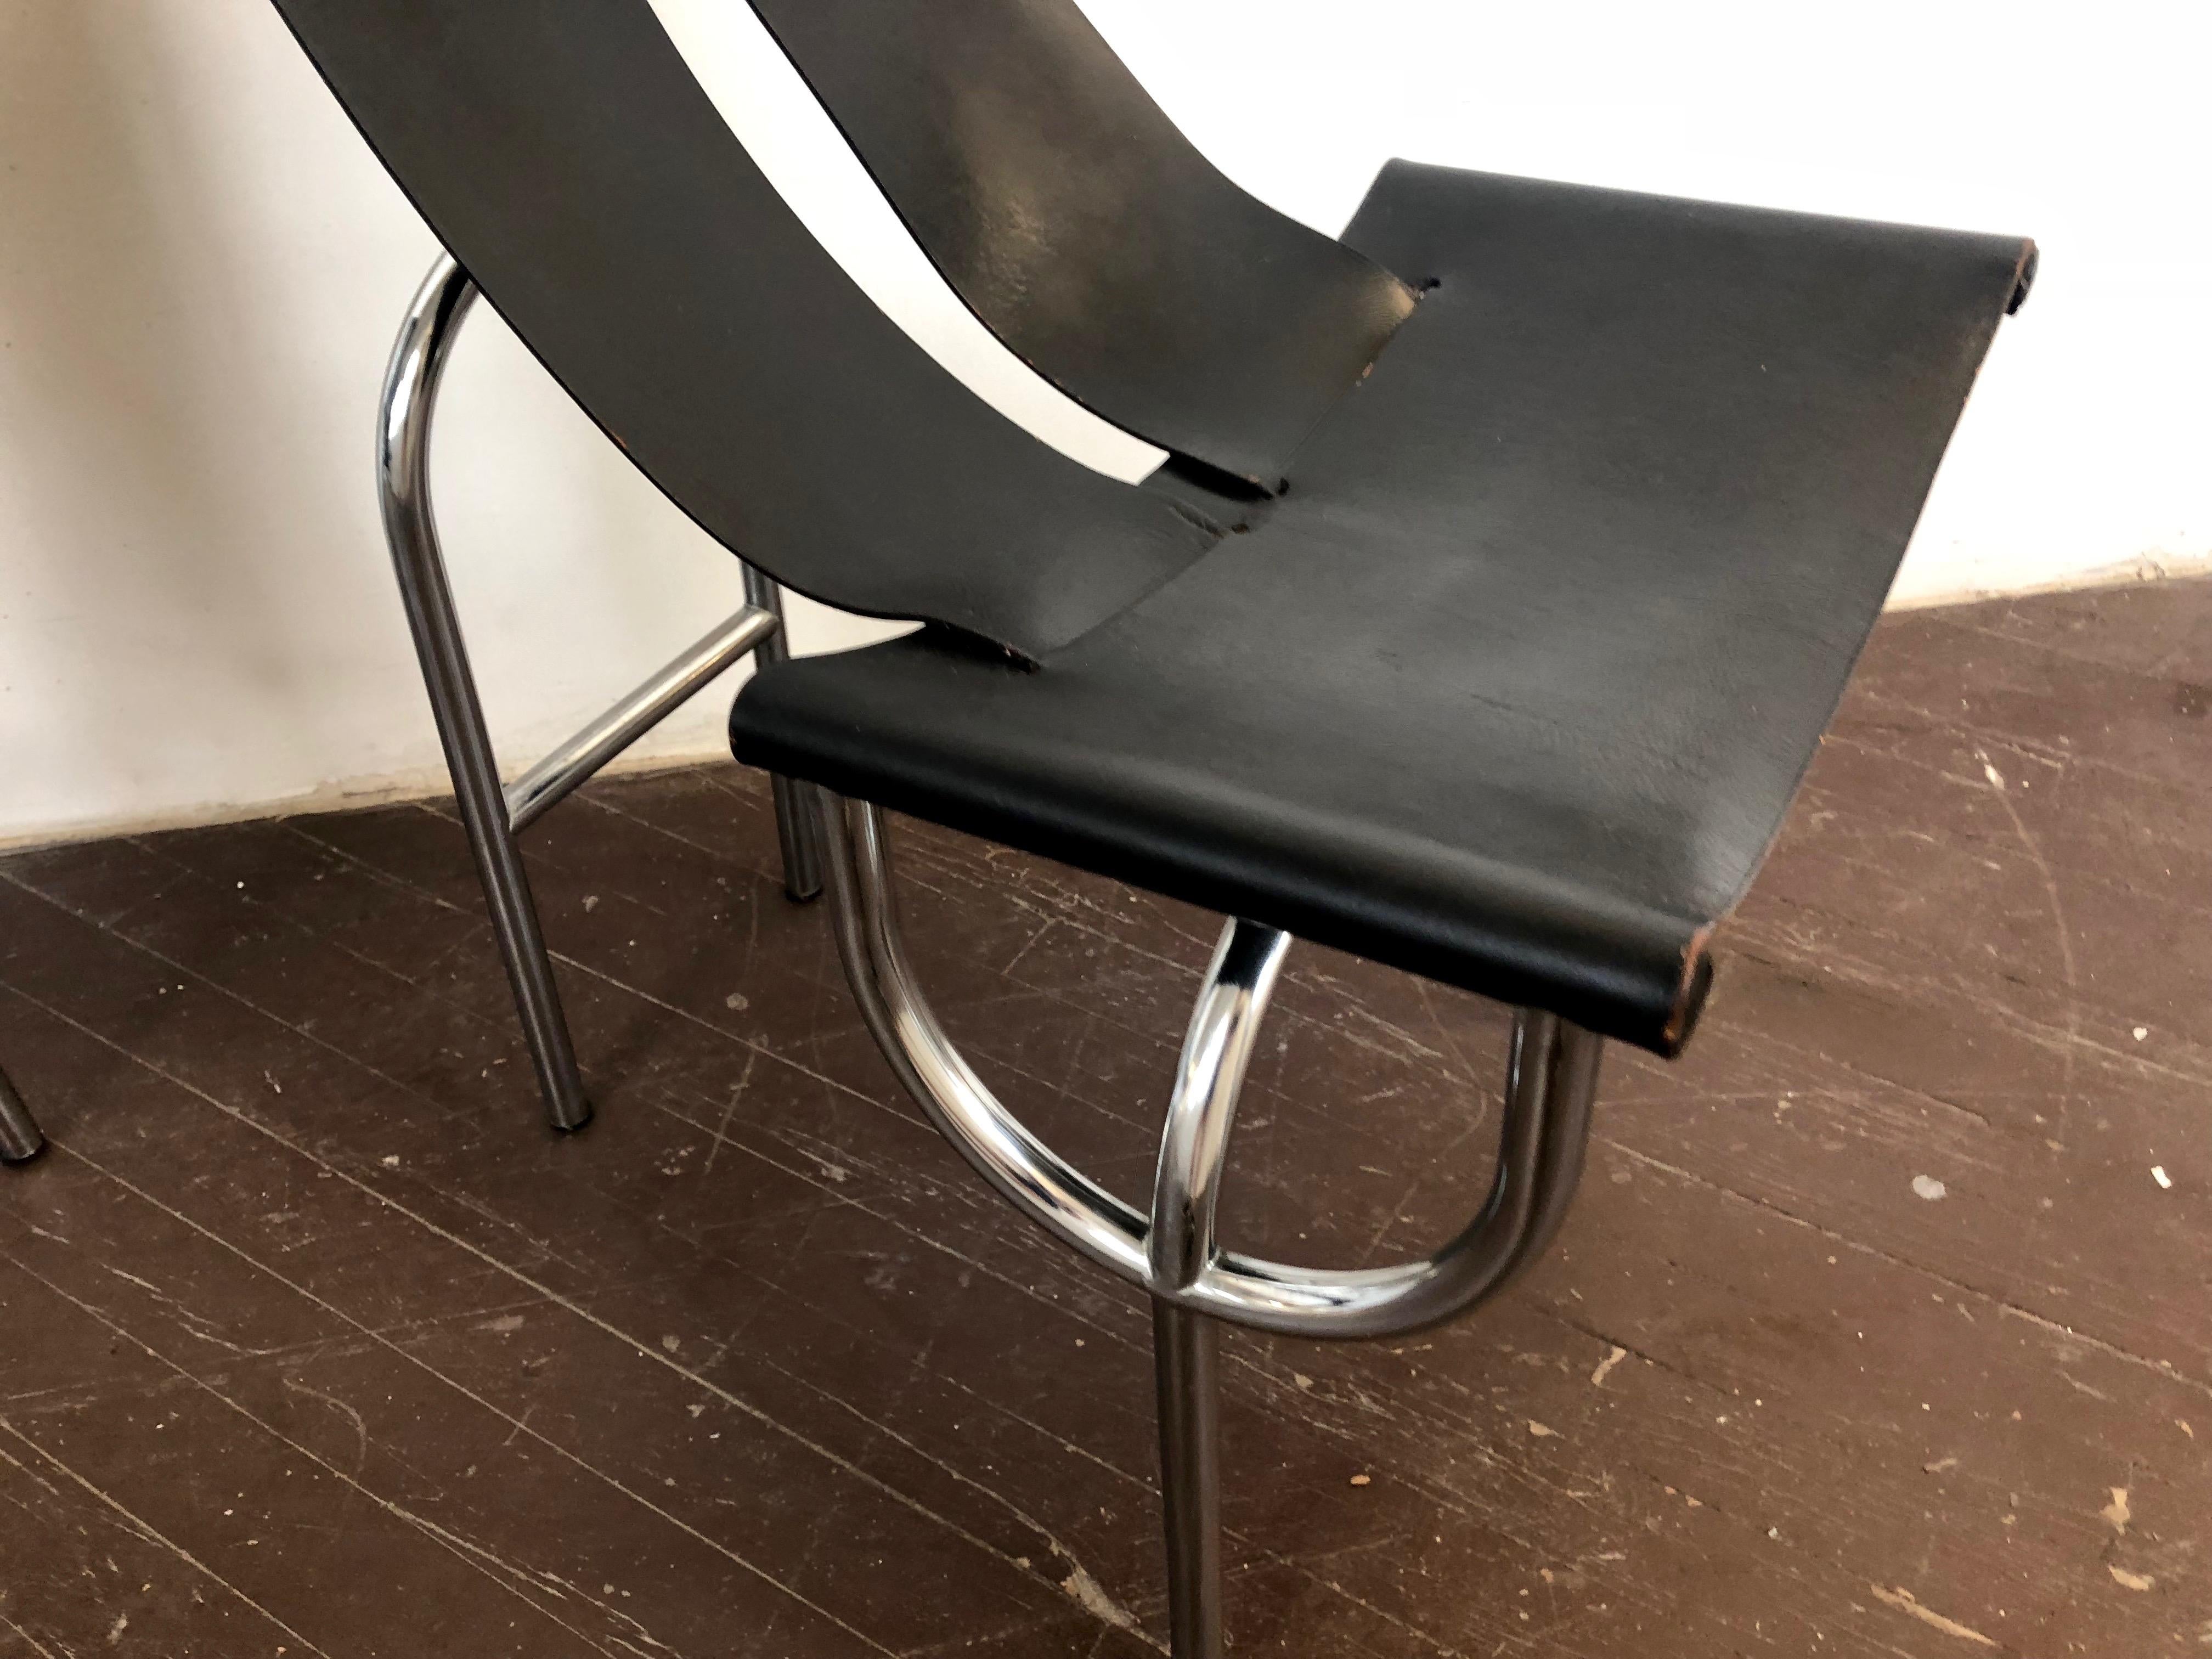 Pair of TRI 15 Chairs by Roberto Gabetti & AImaro Isola for Arbo, Italy, 1968 In Good Condition For Sale In Jersey City, NJ